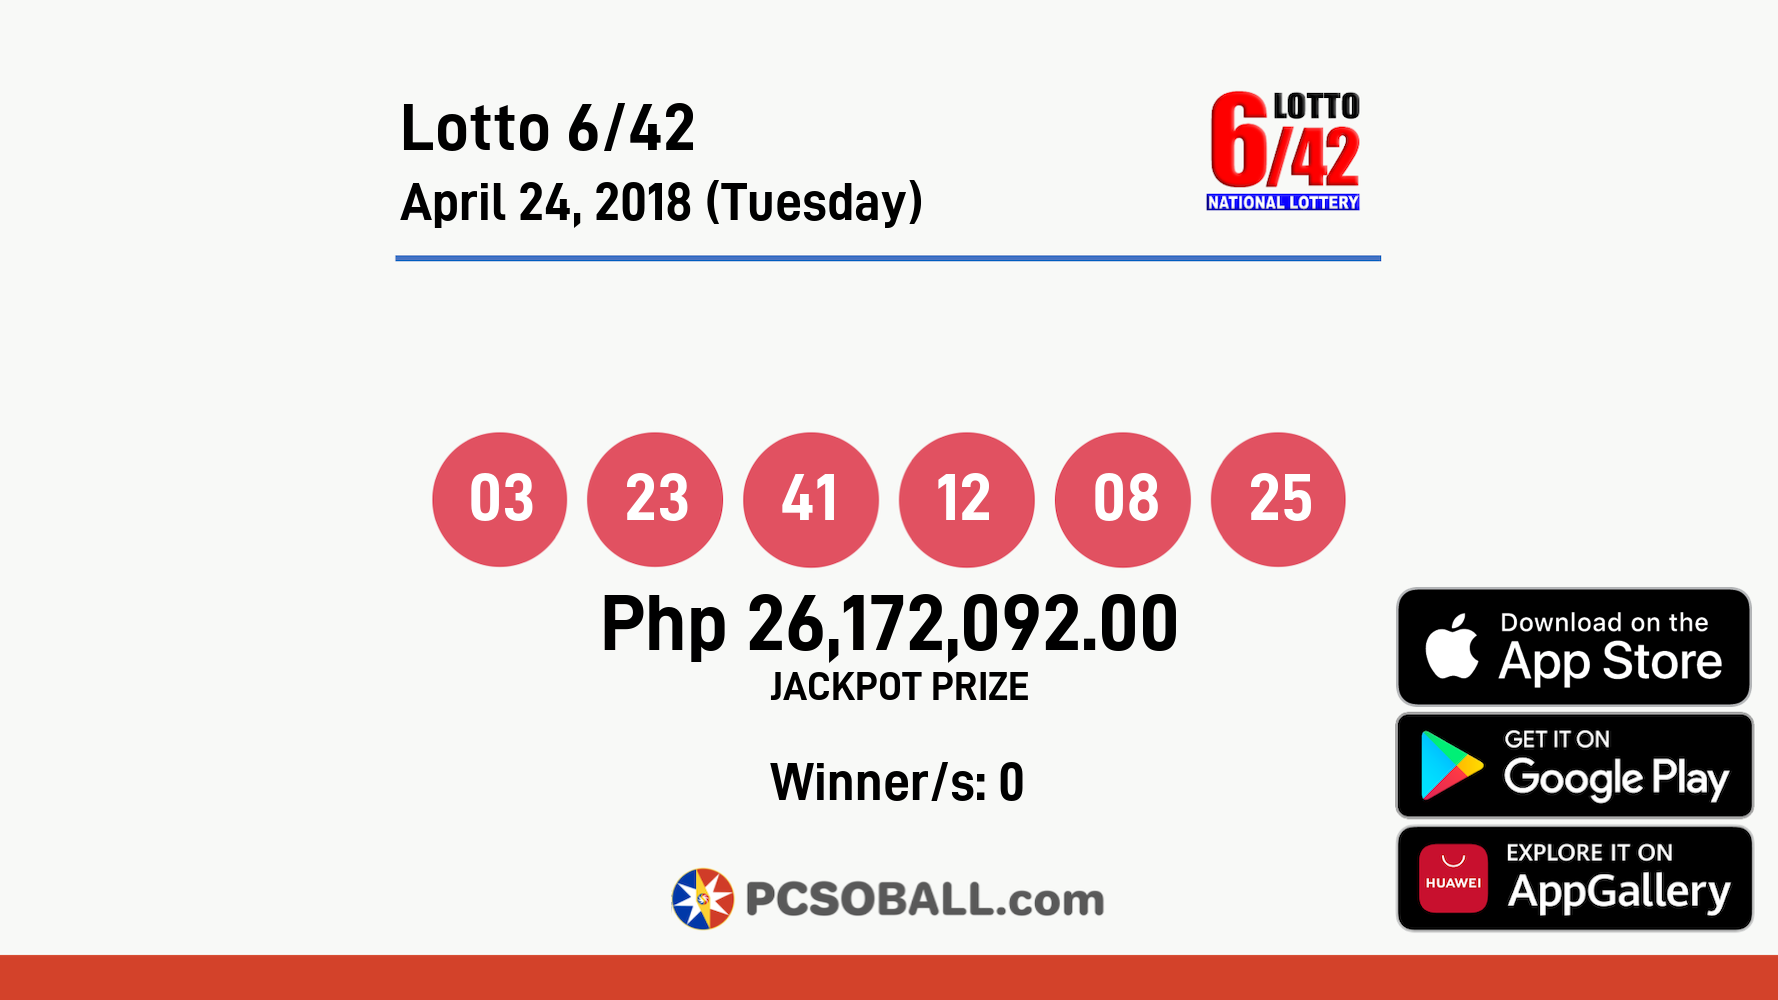 Lotto 6/42 April 24, 2018 (Tuesday) Result